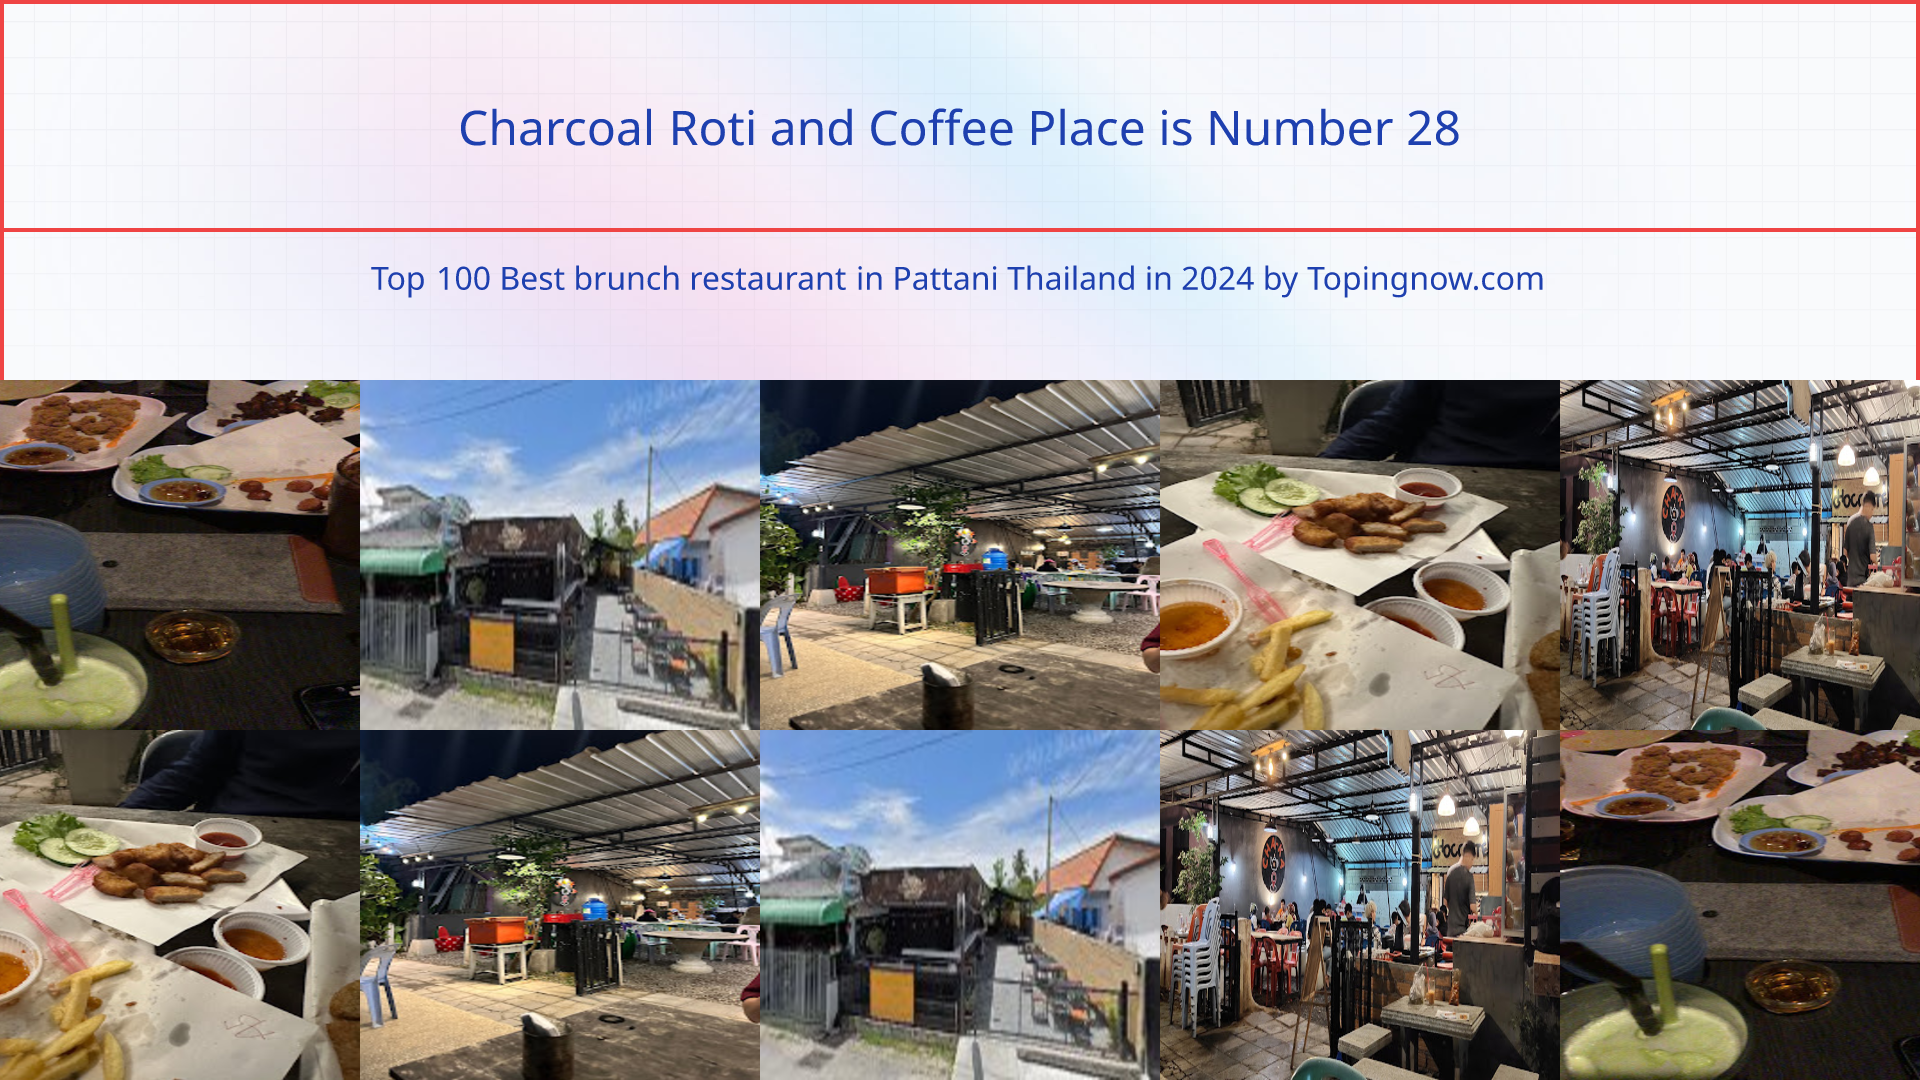 Charcoal Roti and Coffee Place: Top 100 Best brunch restaurant in Pattani Thailand in 2024